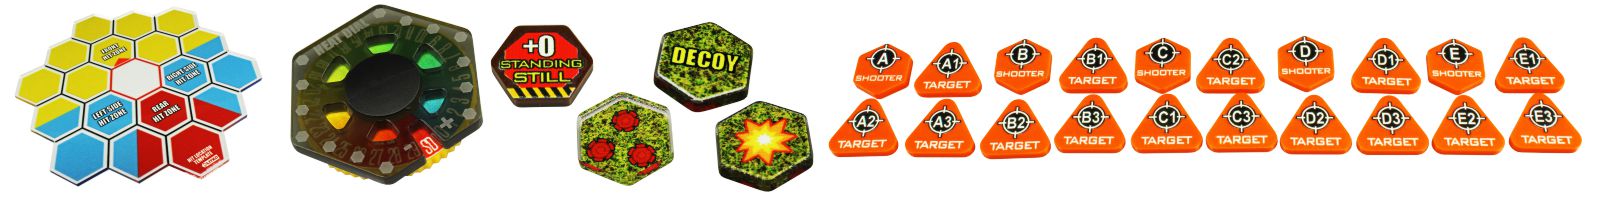 New Token Upgrades Compatible with Battletech